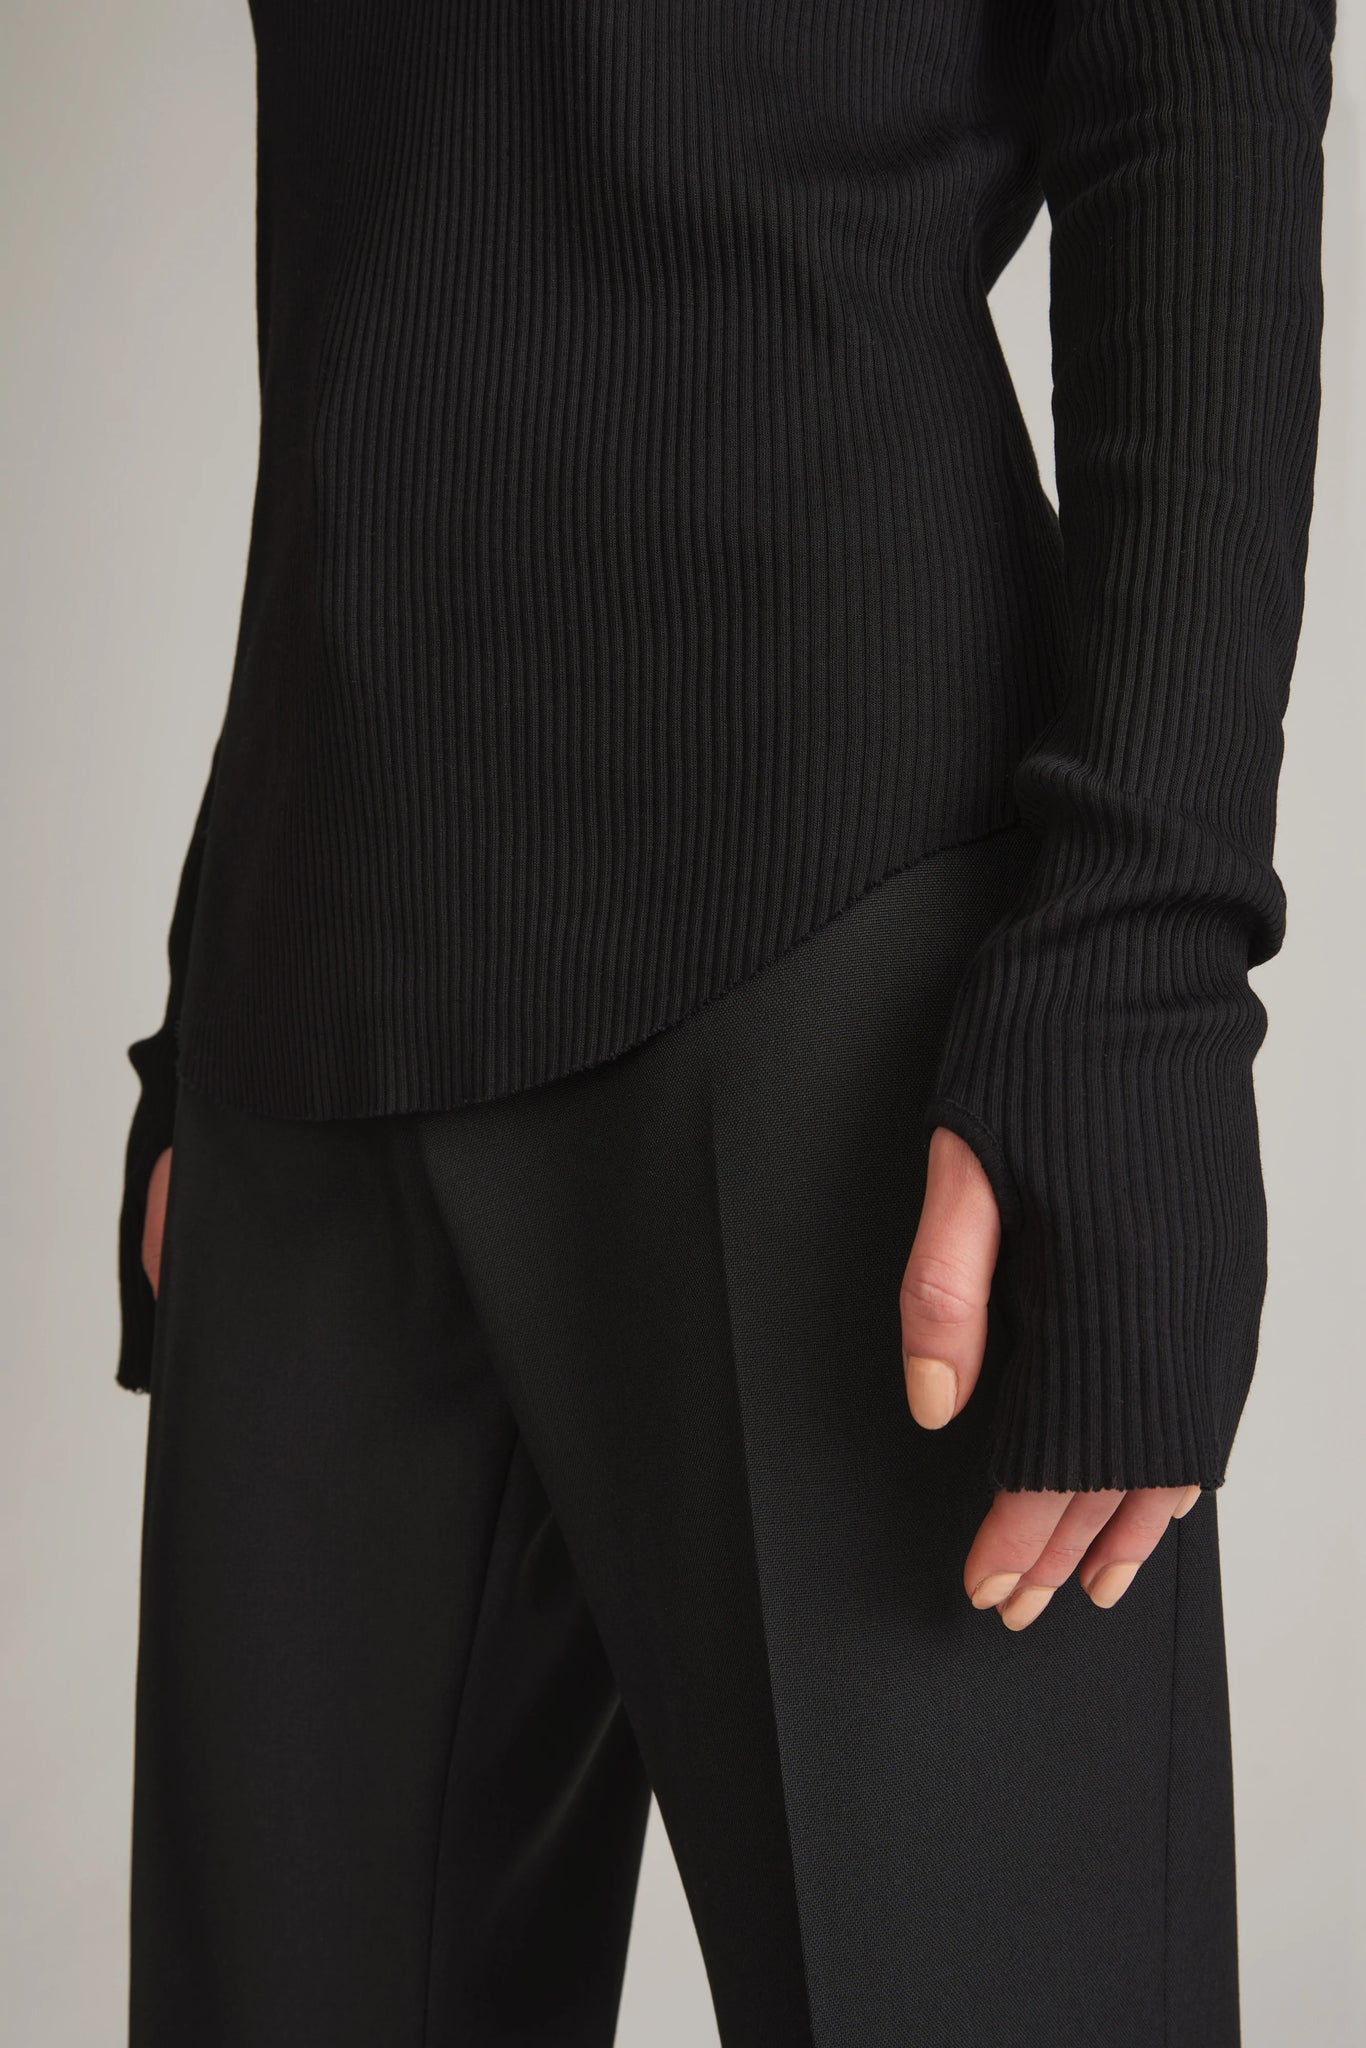 Turtleneck in black cotton rib by Hope